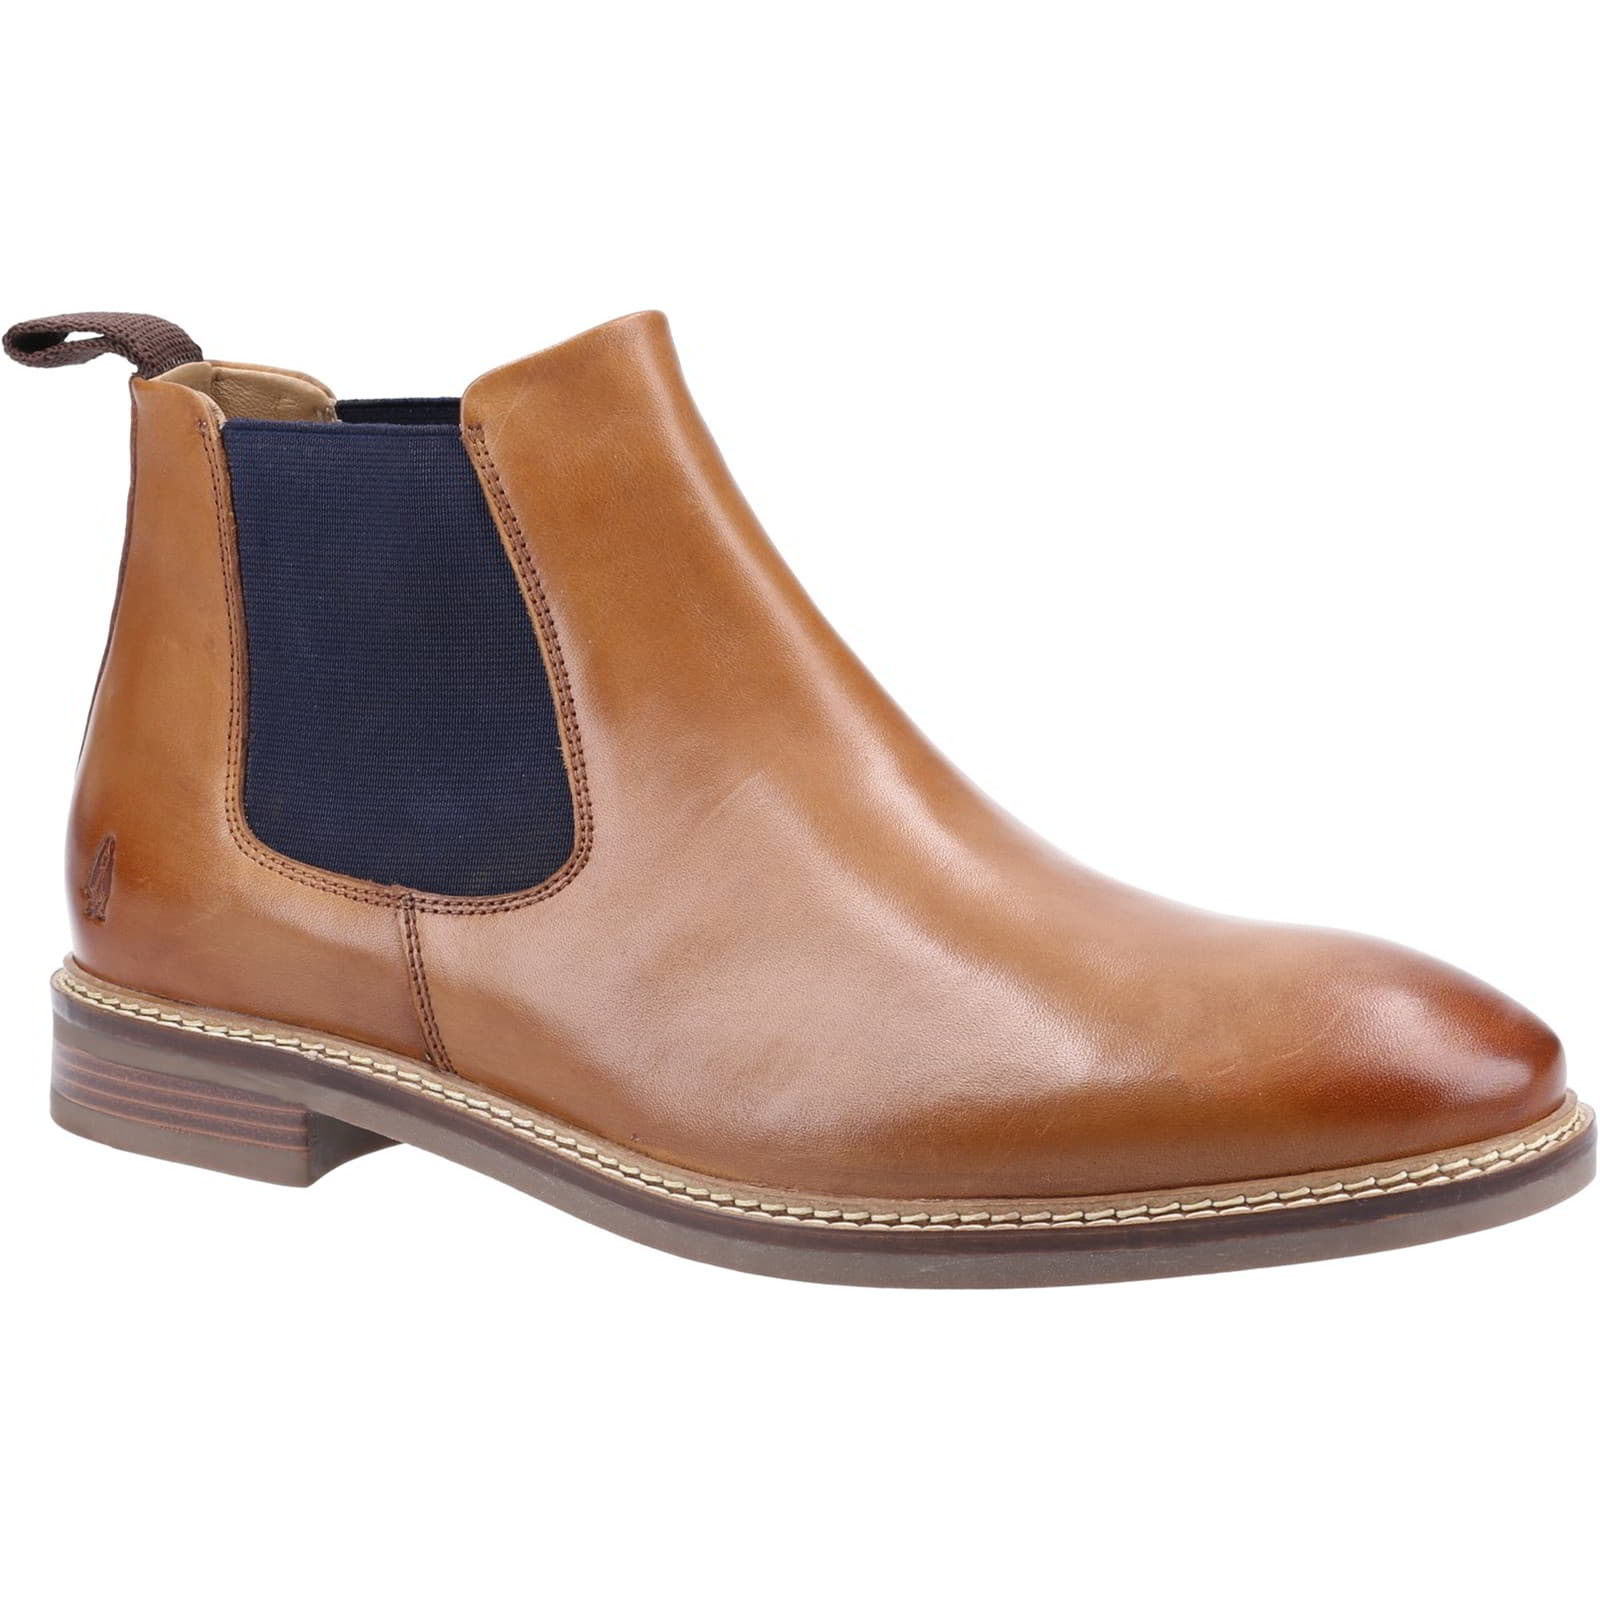 Hush Puppies Men's Blake Pull On Chelsea Ankle Boots - UK 12